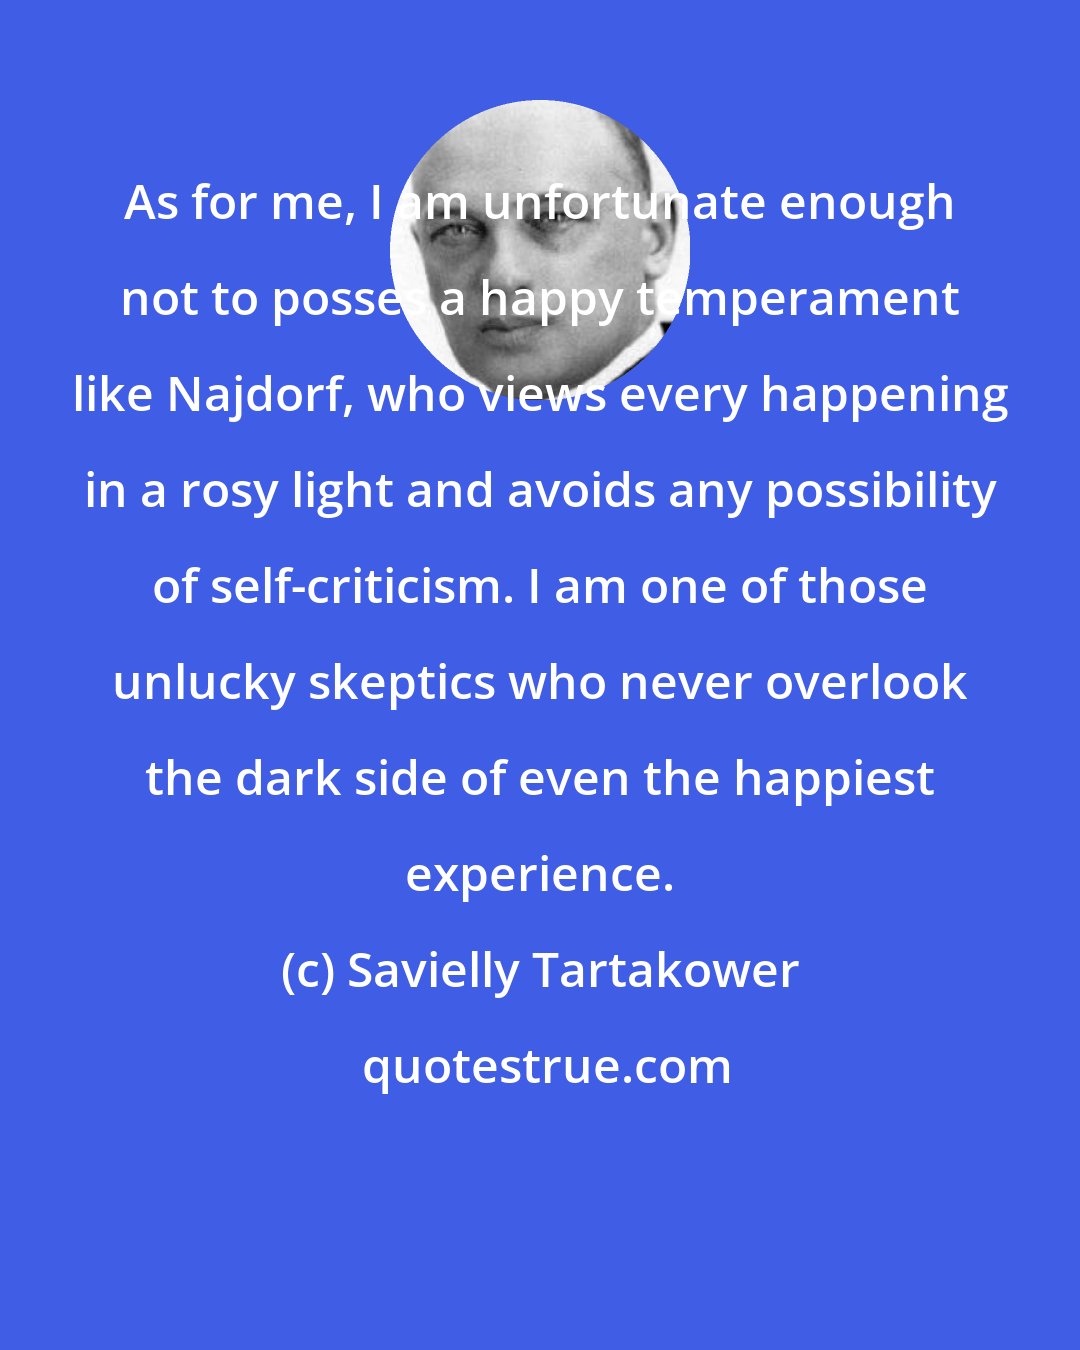 Savielly Tartakower: As for me, I am unfortunate enough not to posses a happy temperament like Najdorf, who views every happening in a rosy light and avoids any possibility of self-criticism. I am one of those unlucky skeptics who never overlook the dark side of even the happiest experience.